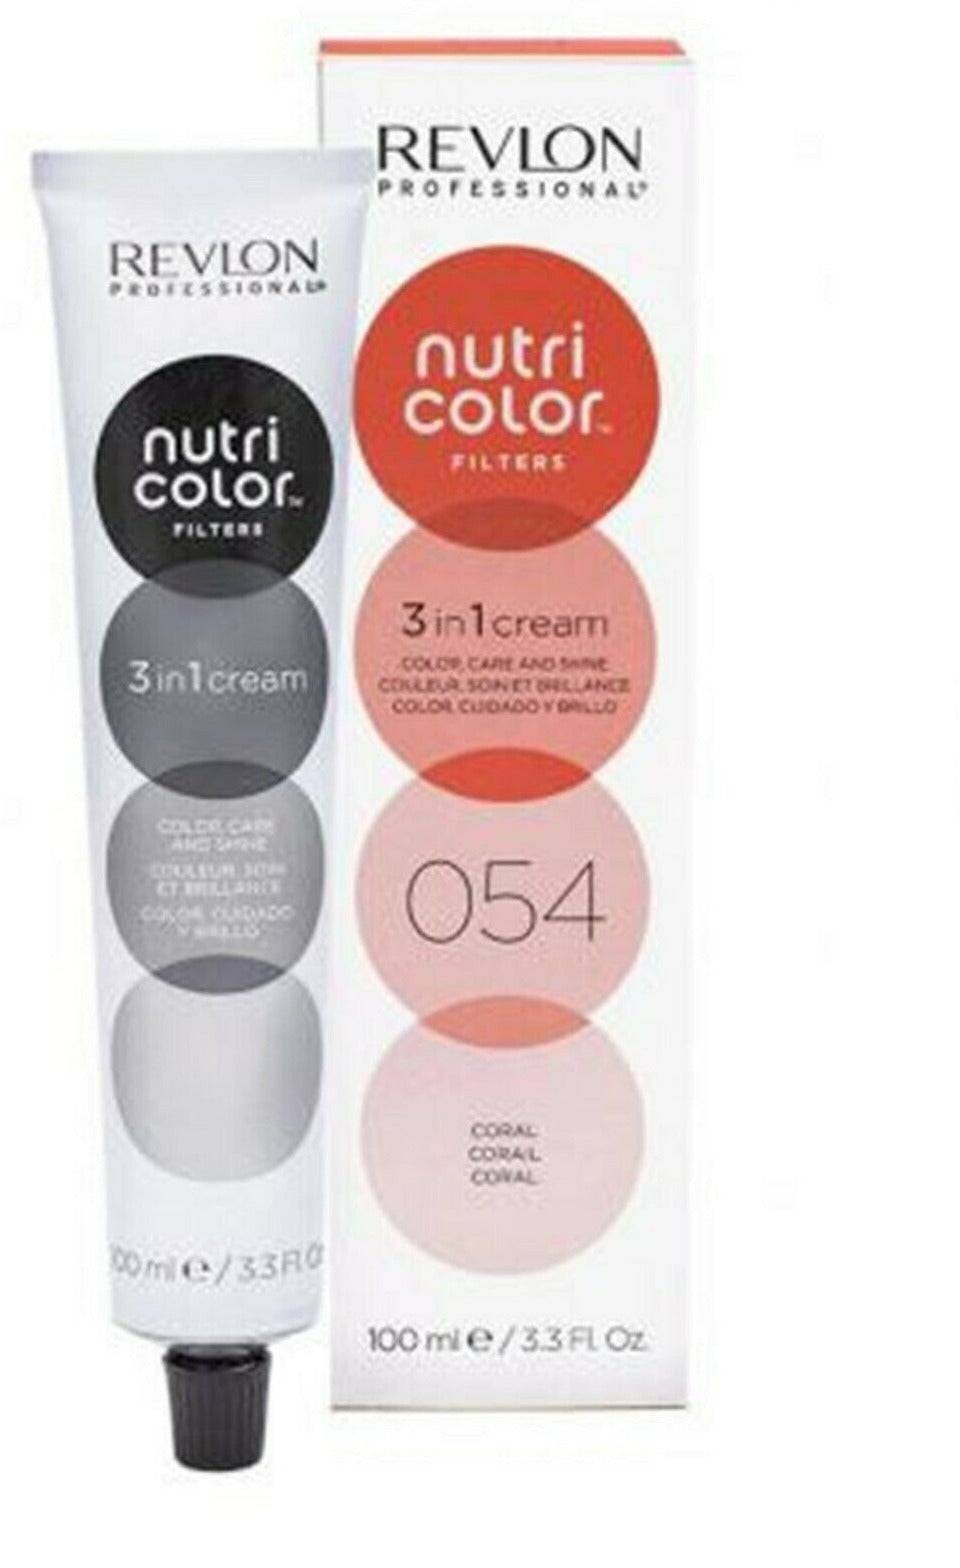 Revlon Professional Nutri Color Creme 3 in 1 Cream #054 Coral 100ml - On Line Hair Depot